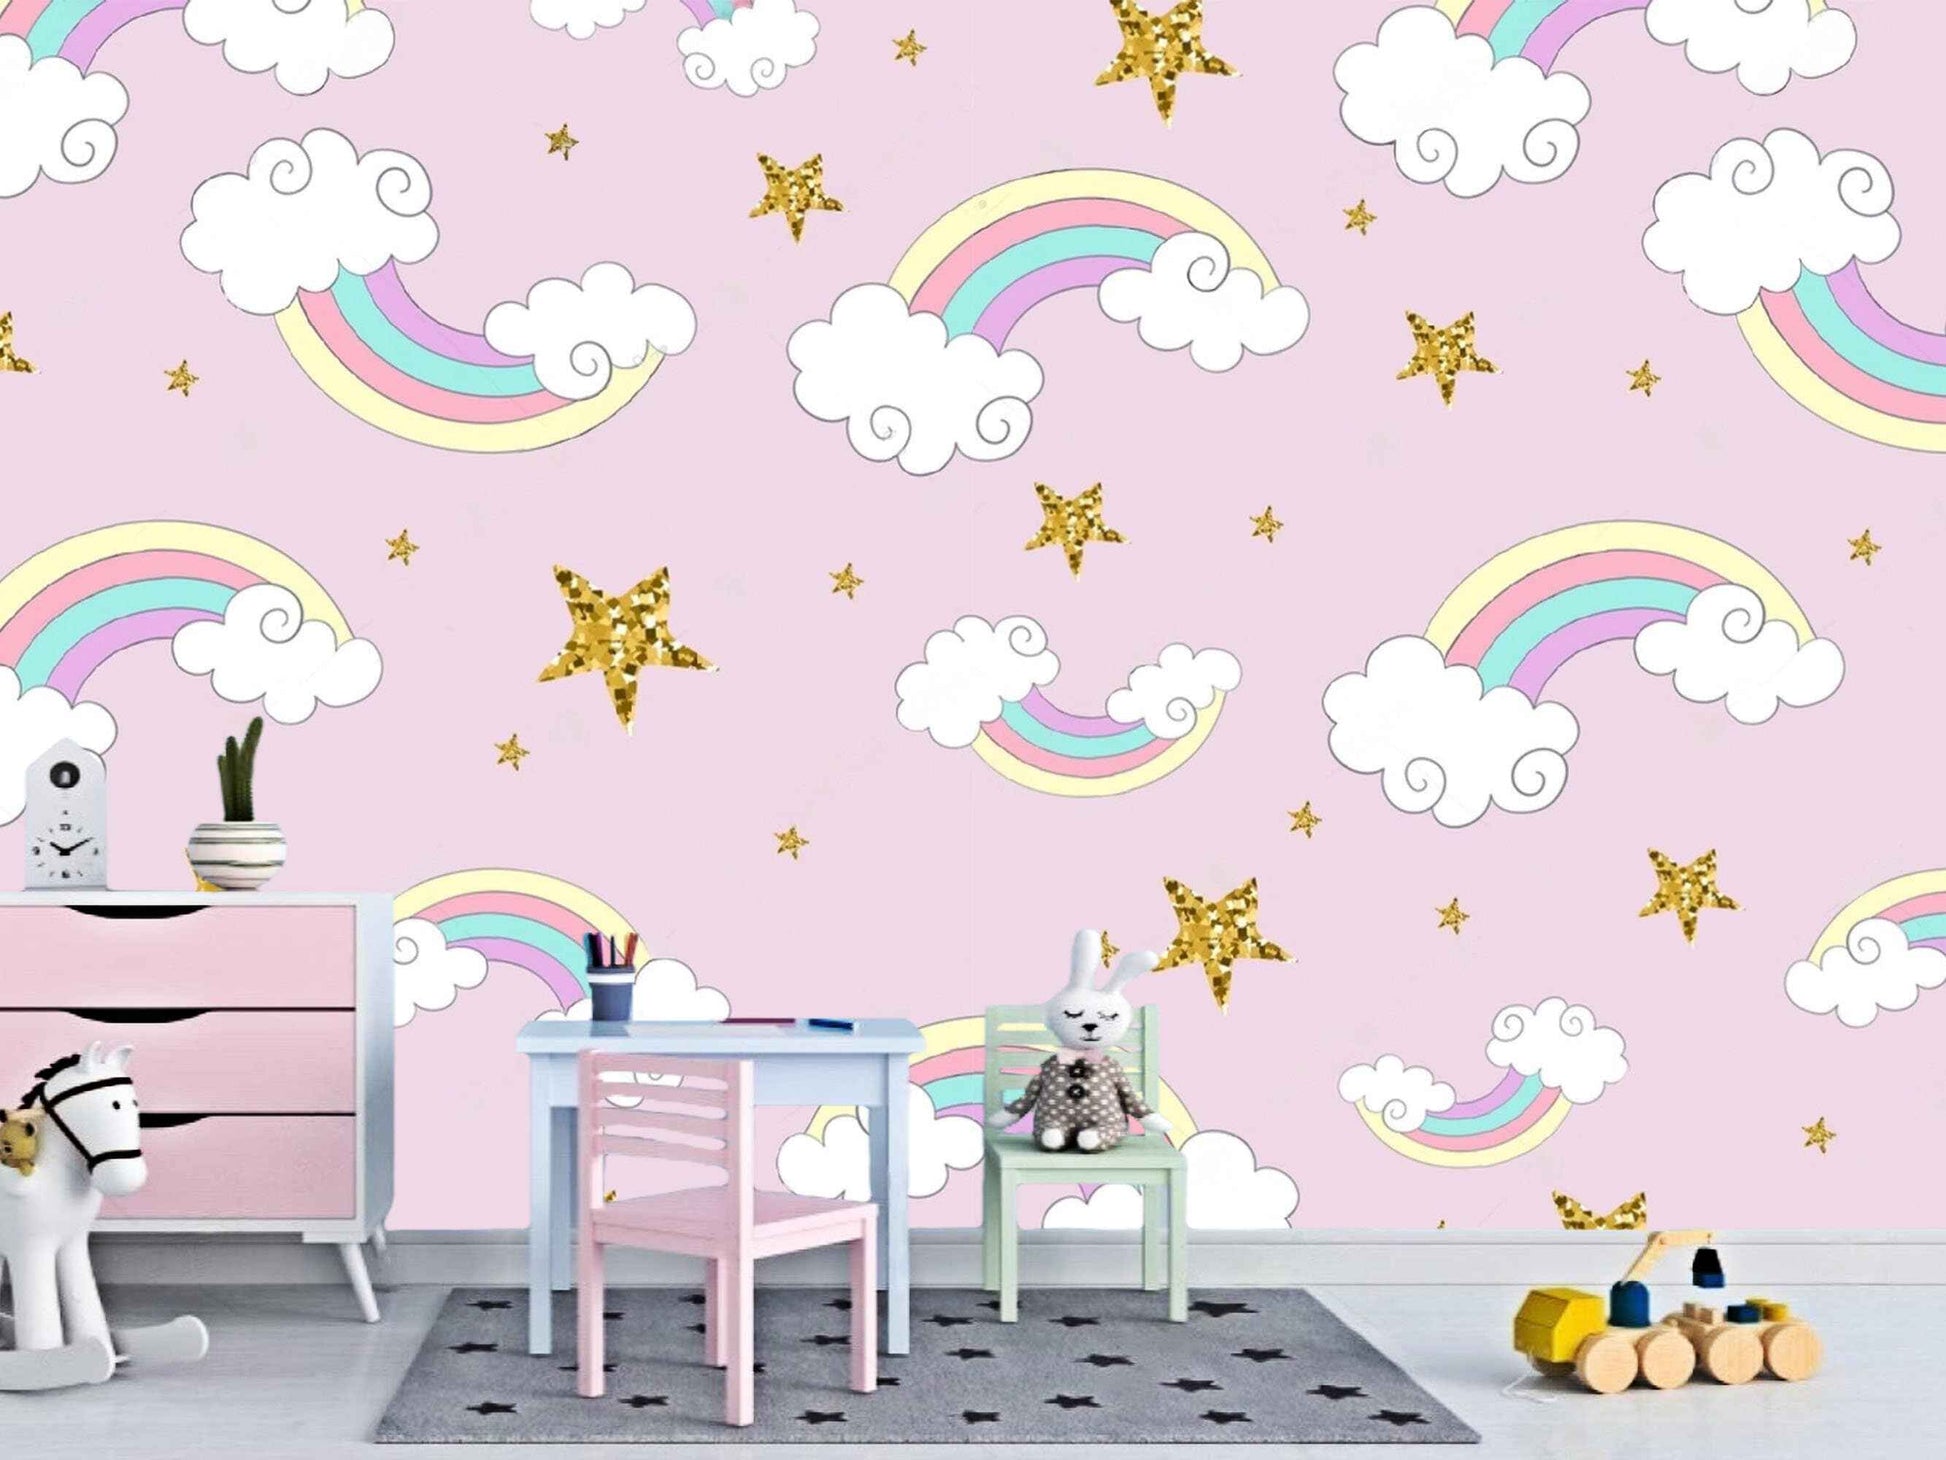 Vibrant rainbow pattern wallpaper, adding a pop of color and whimsy to the space.